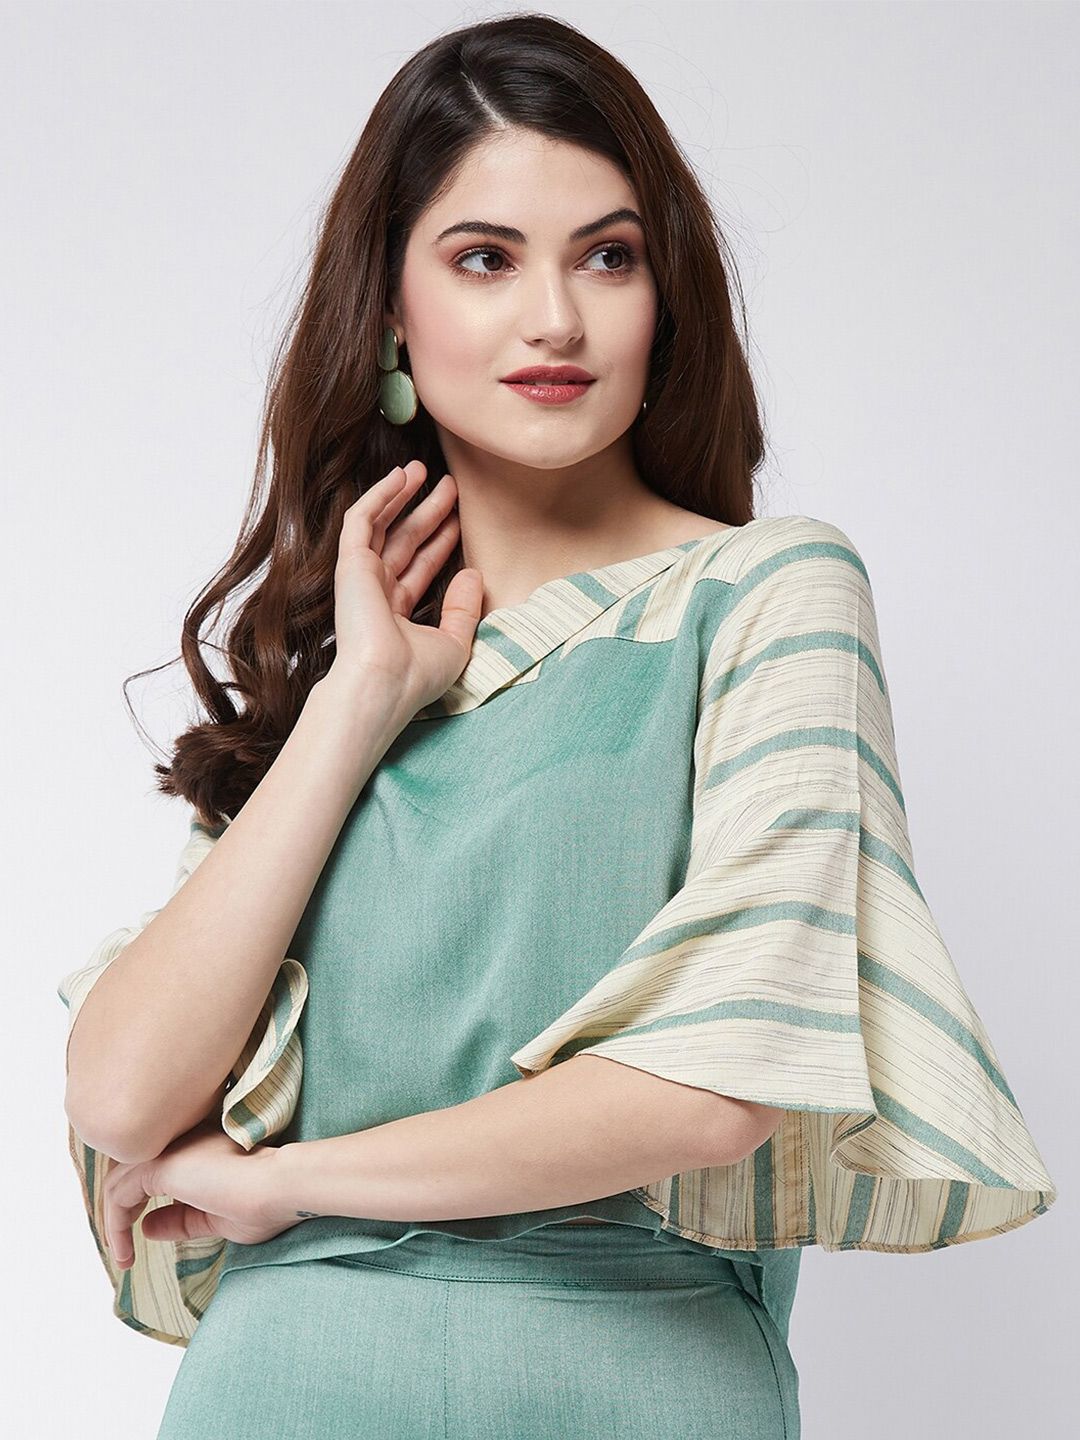 Pannkh Green Top Price in India